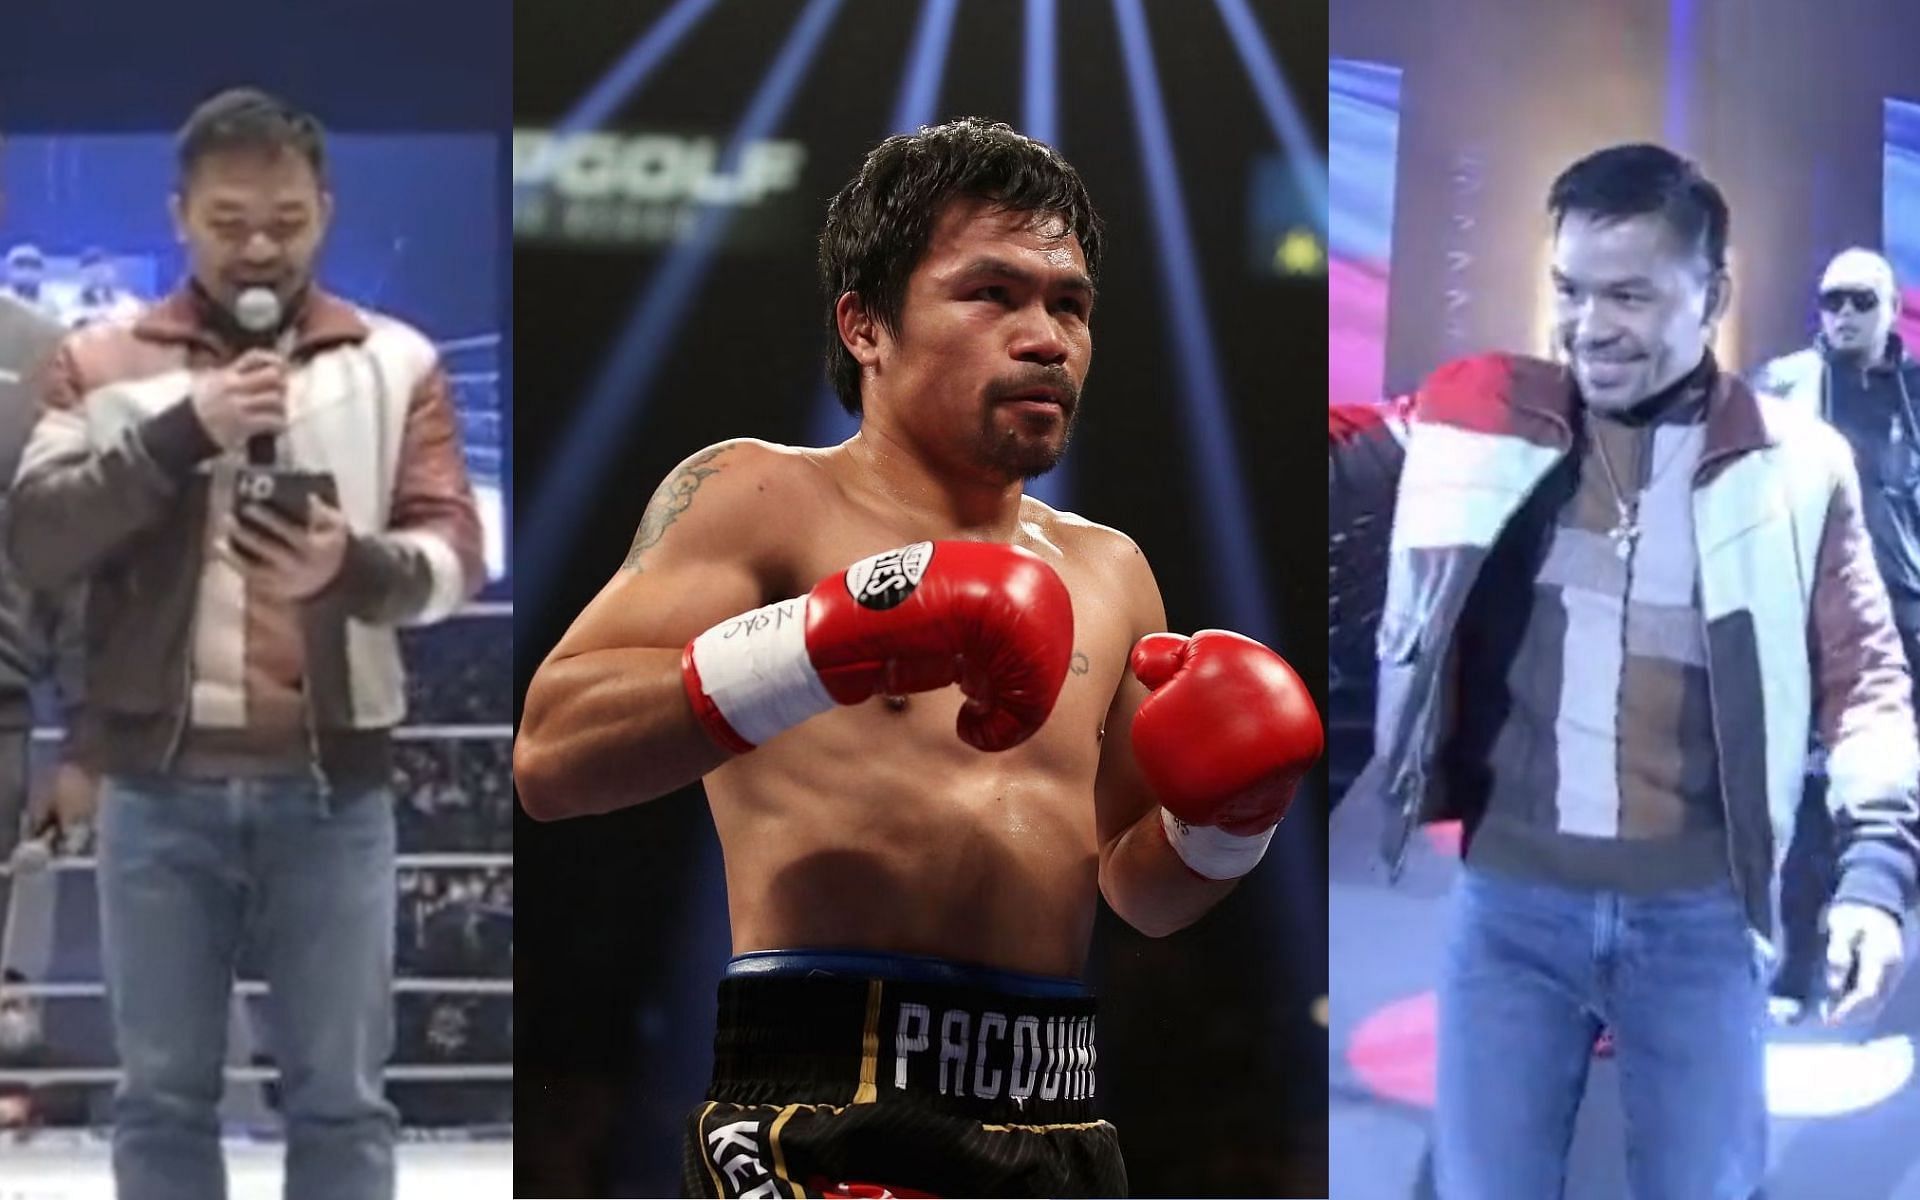 Manny Pacquiao making announcement at Rizin event (left), Manny Pacquiao (middle) and Pacquiao walking into the ring at Rizin event (right) [Images courtesy: @rizin_english on Twitter]